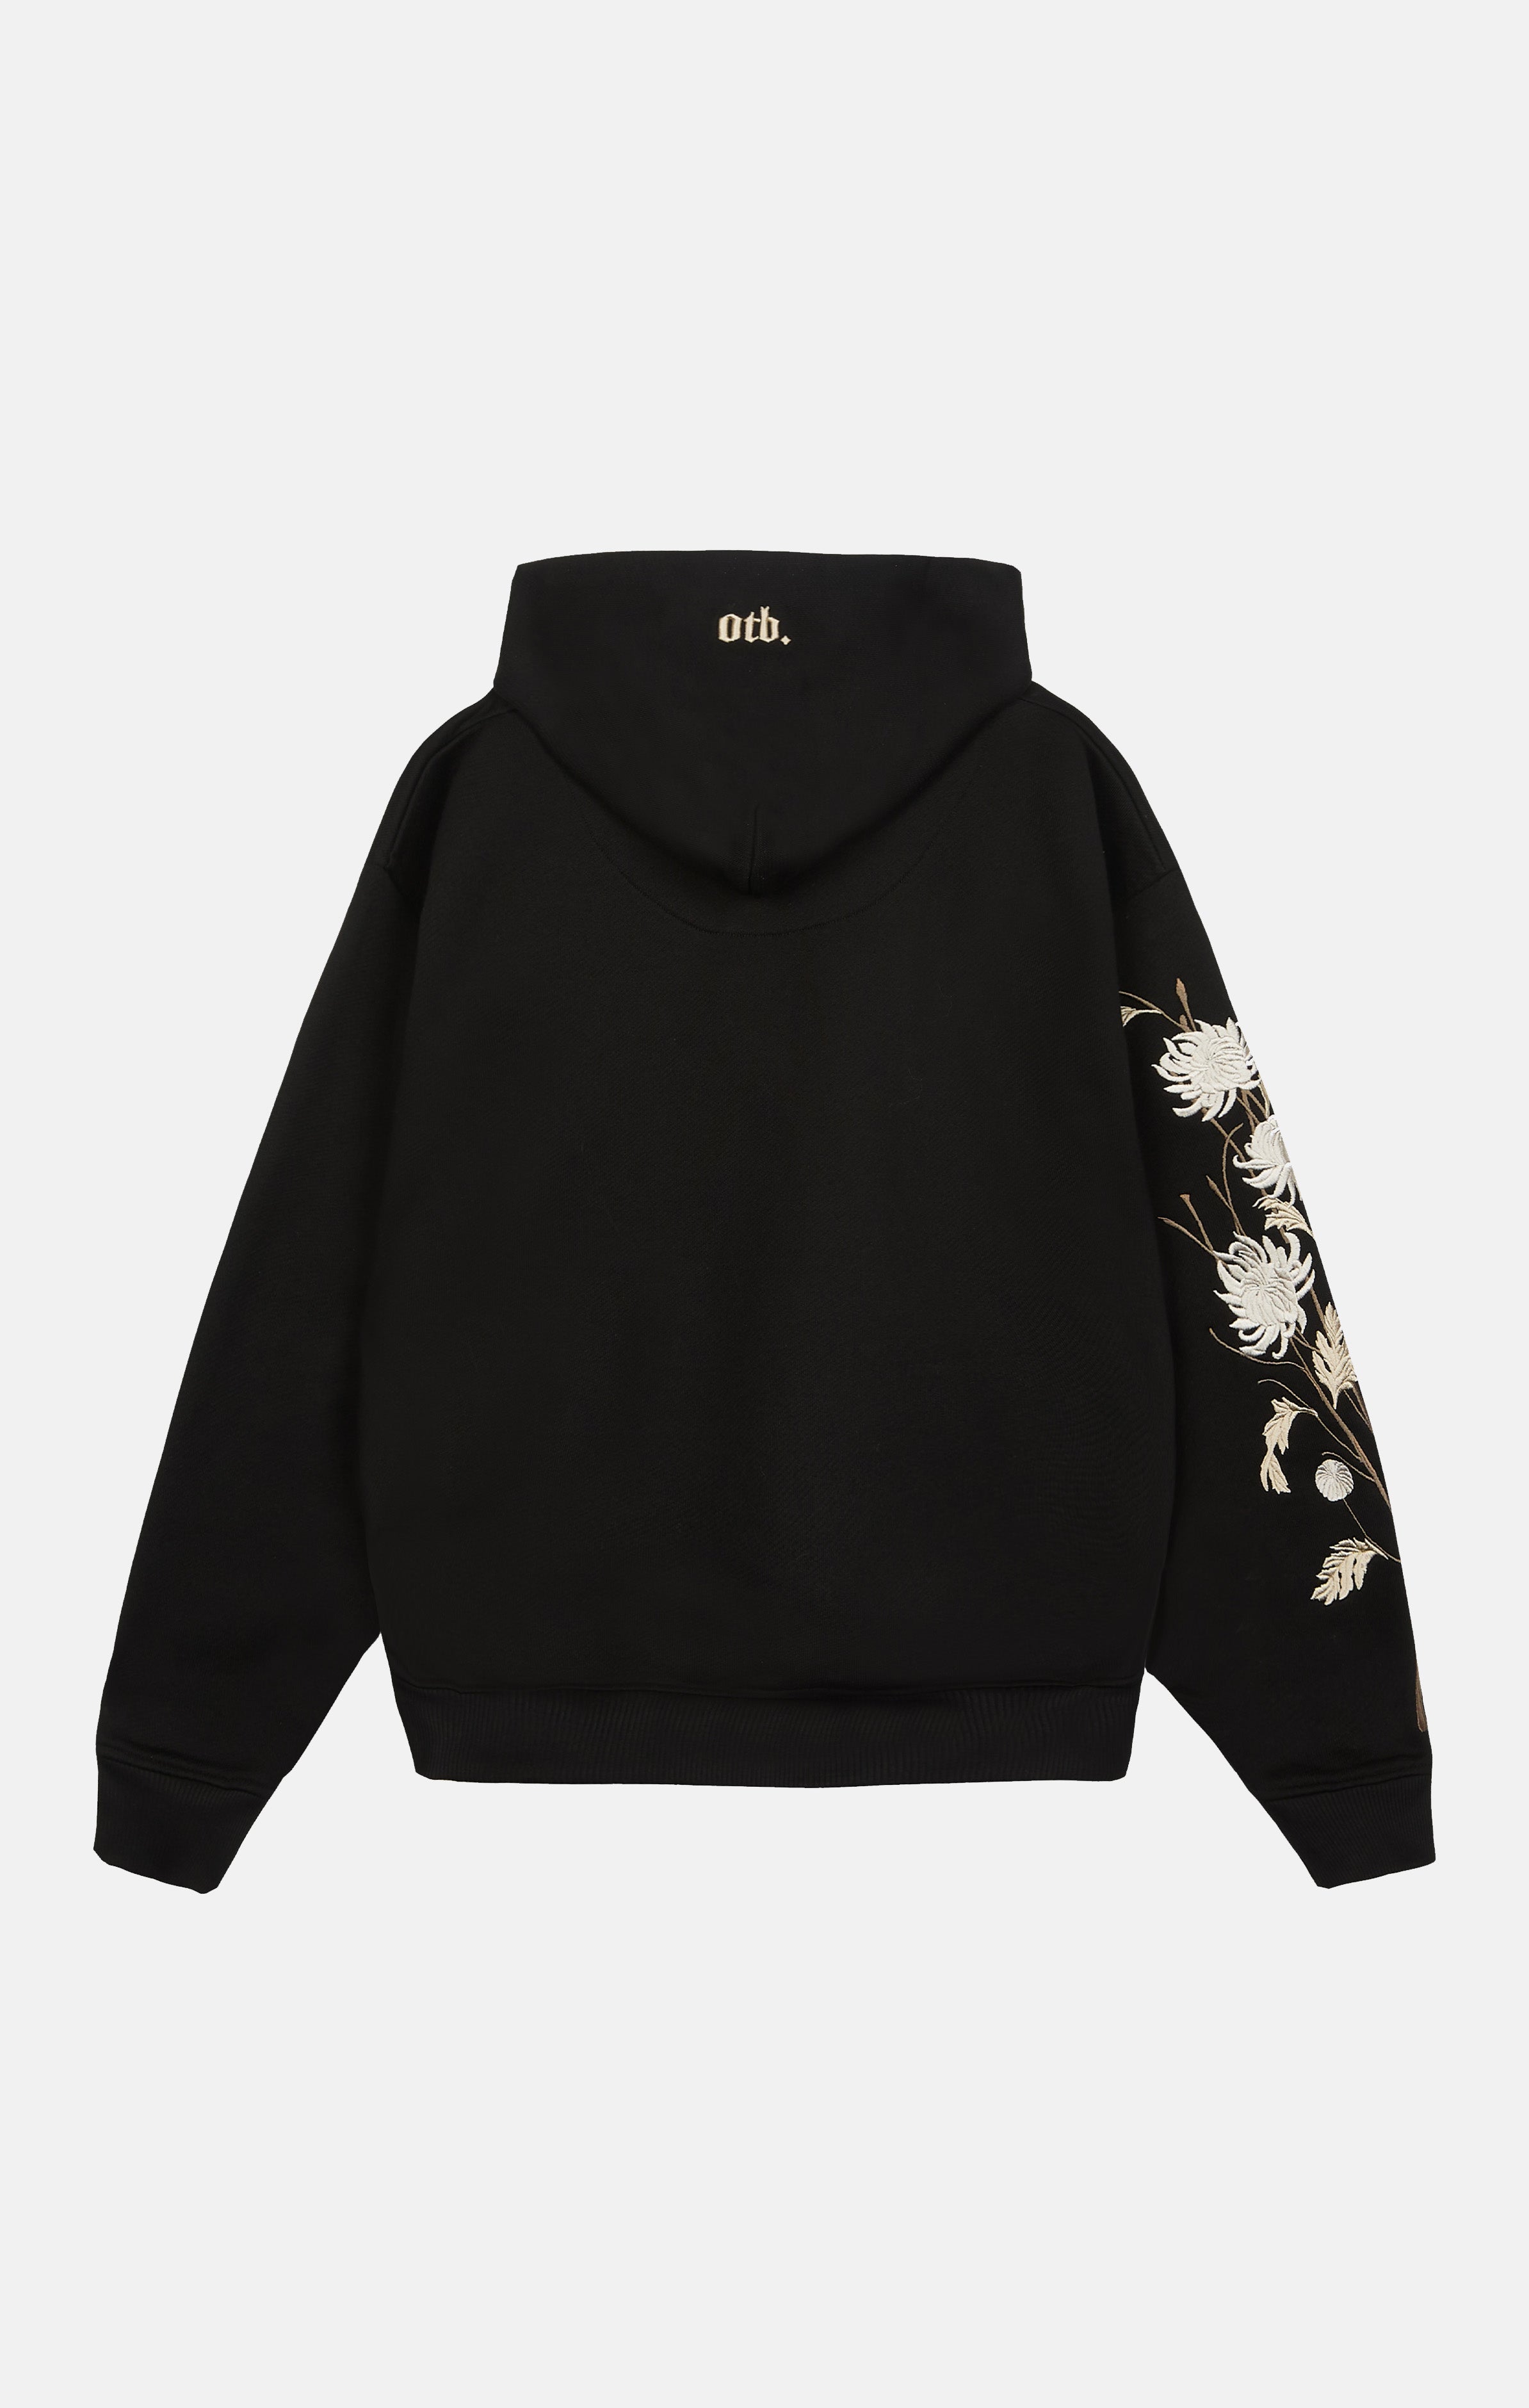 ONLY THE BLIND - Colt Black Embroidered Floral Hoodie